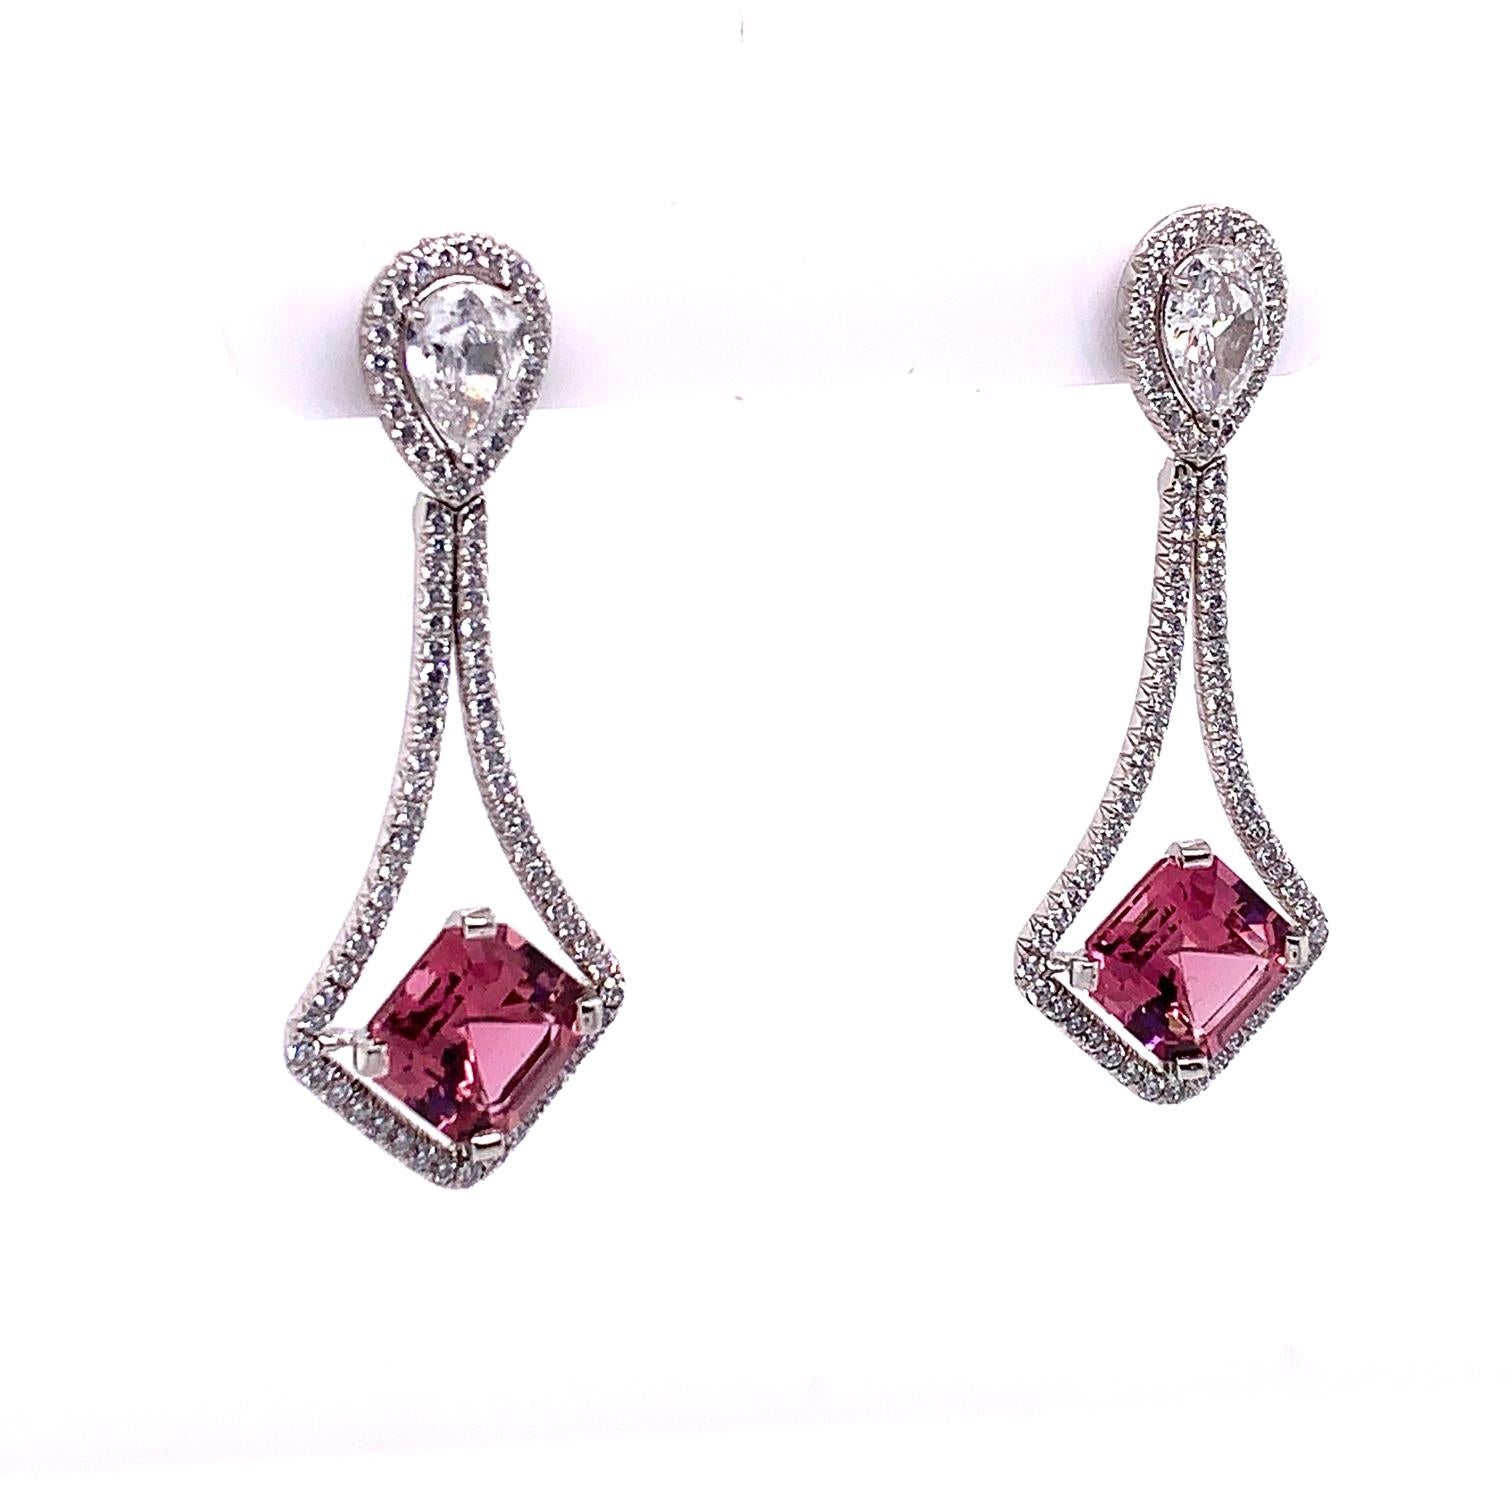 These one of a kind Pink Tourmaline and White Diamond Earrings feature two Asscher cut Tourmalines weighing a total of 6.03 carats, set on a bias: mounted with two Pearshape diamonds weighing .72  and .75 carats, GIA Certified graded D color, VVS2